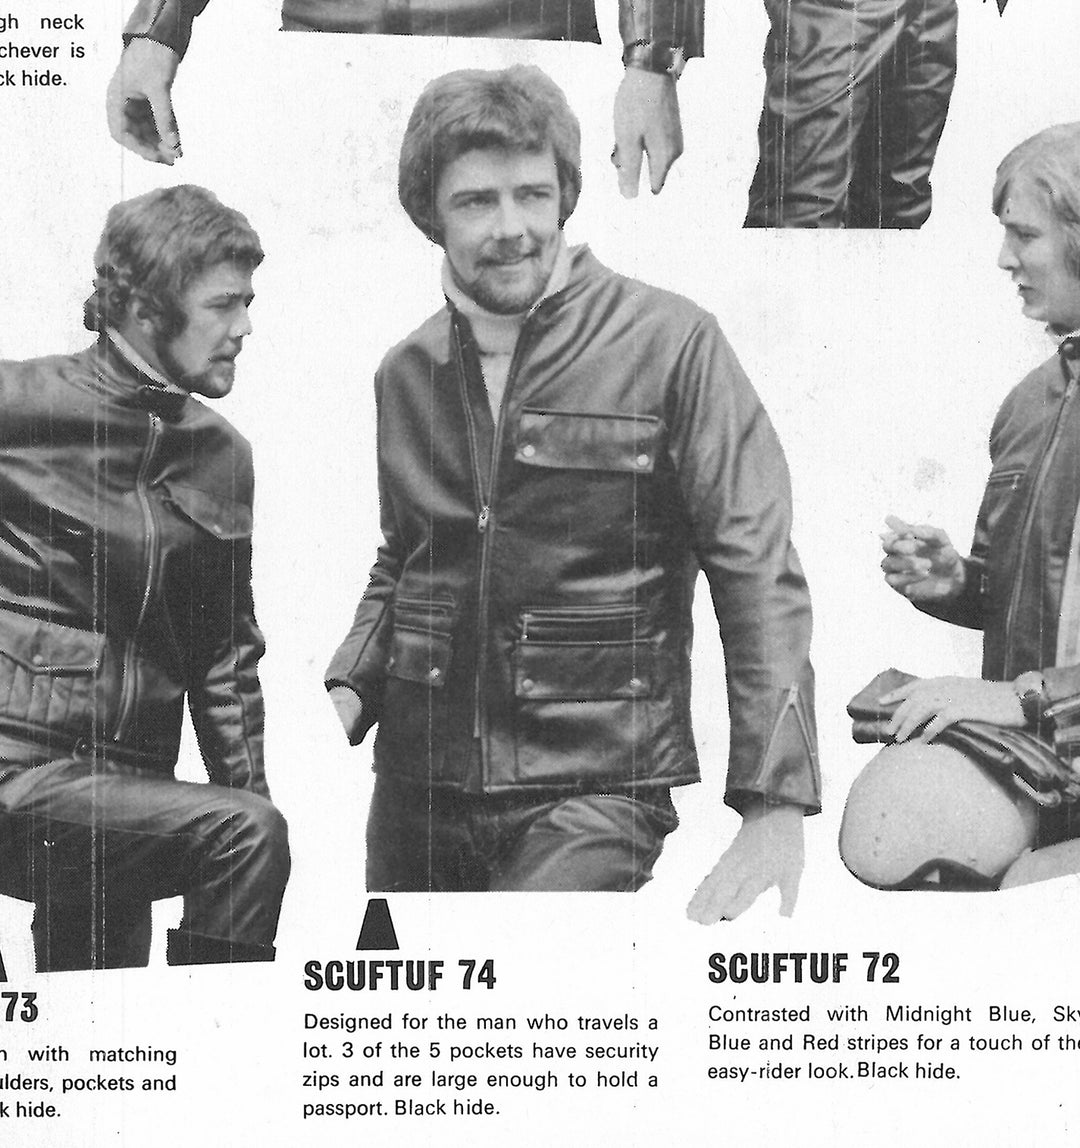 The '74 Scuftuf Jacket